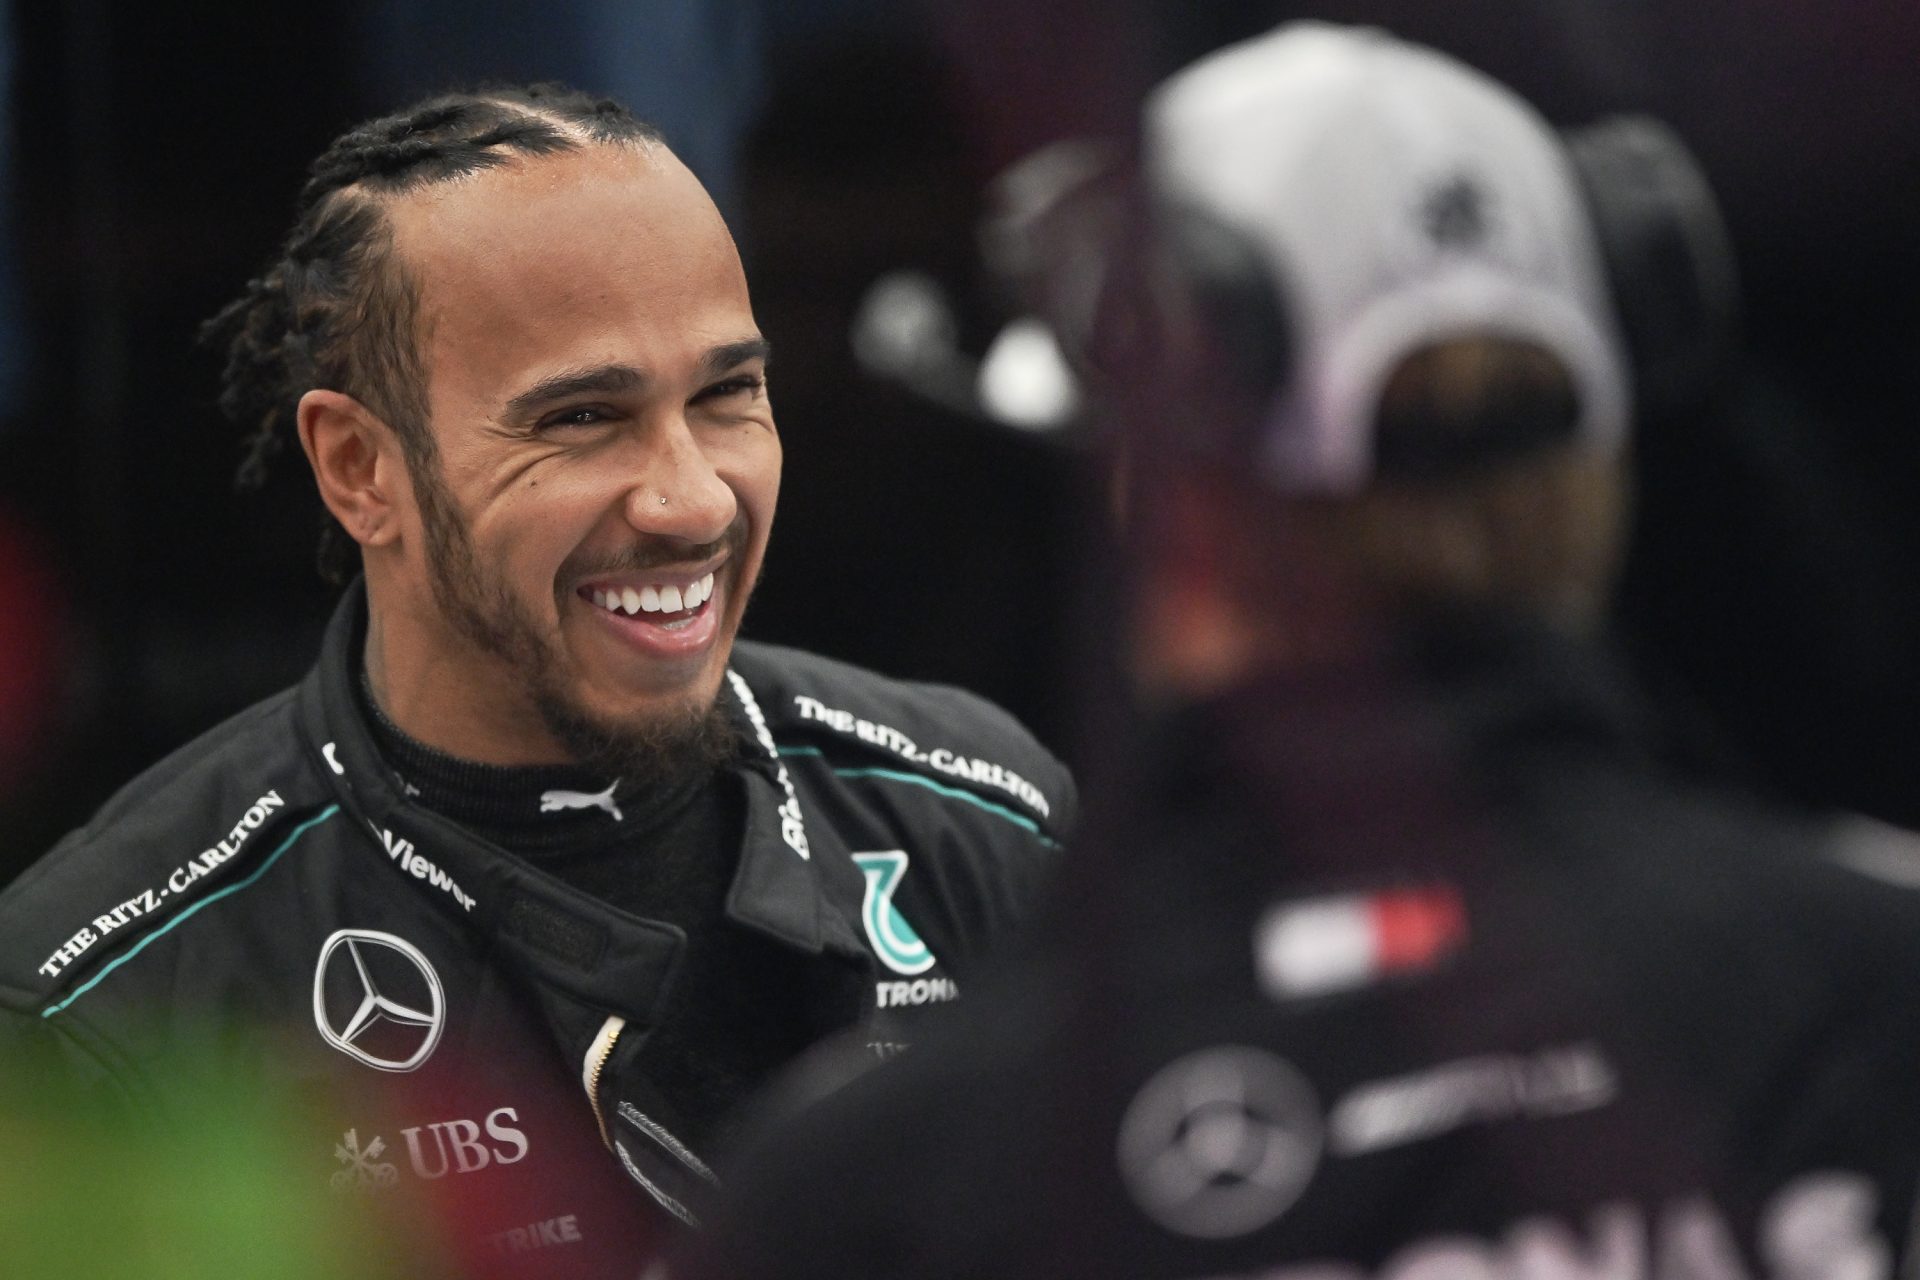 Formula 1: Lewis Hamilton and other winners of the Belgium Grand Prix